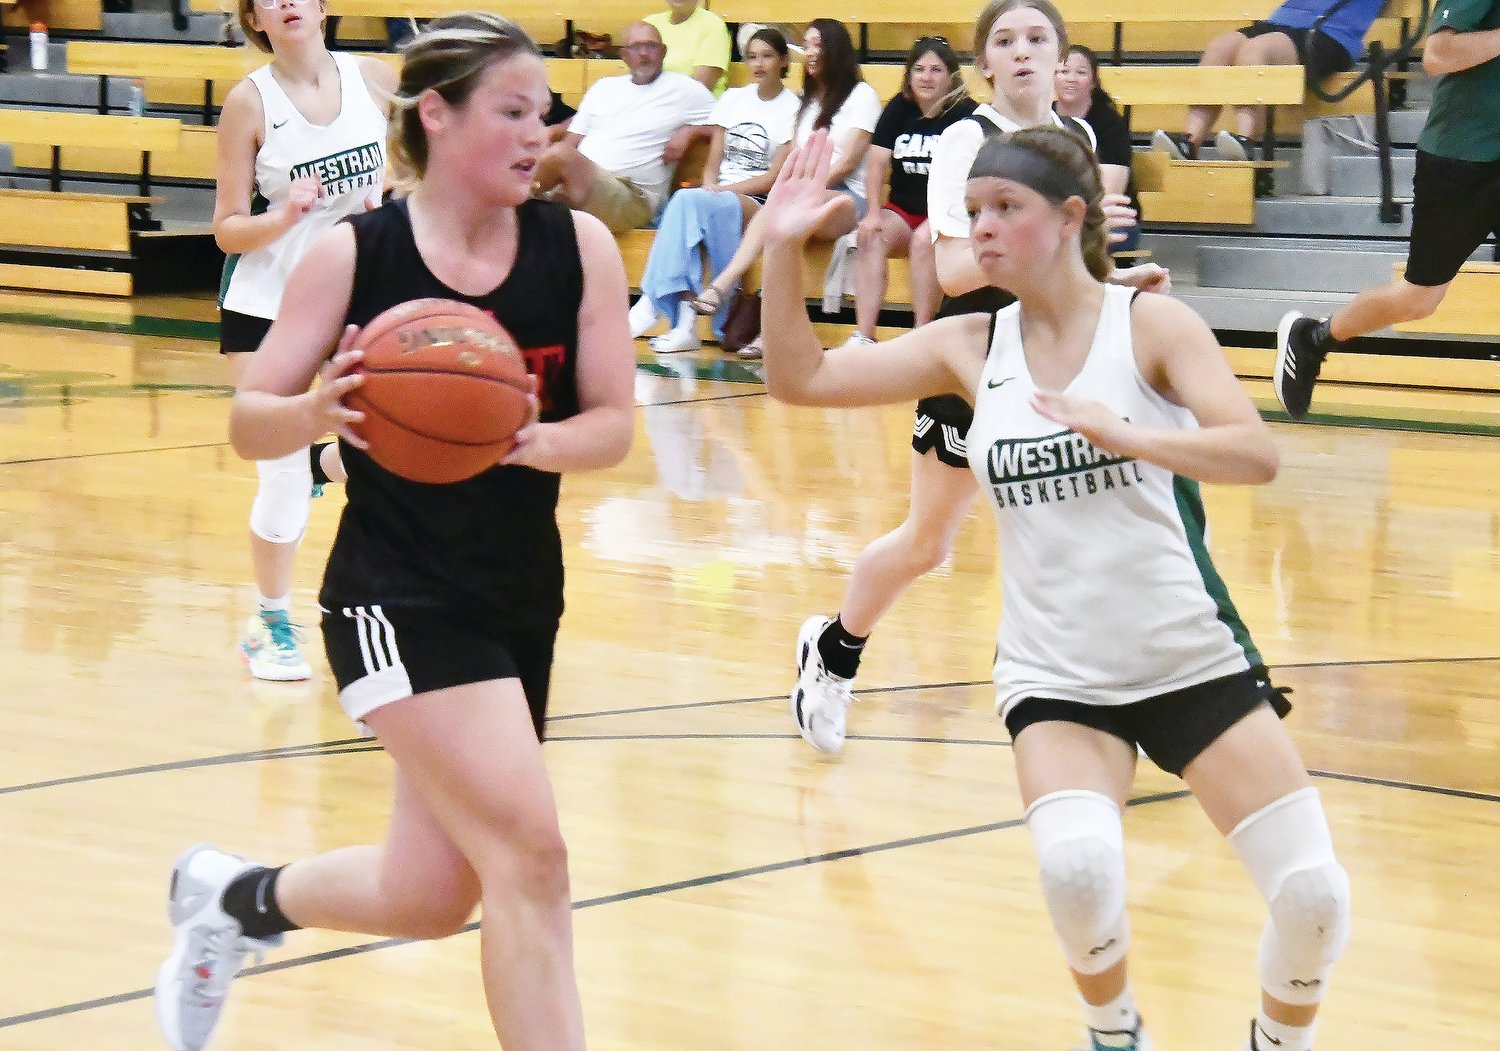 Westran's Shaylynn Morris defends while a Community R-VI player drives toward the basket during a scrimmage between the two schools on Thursday, June 9, in Huntsville.